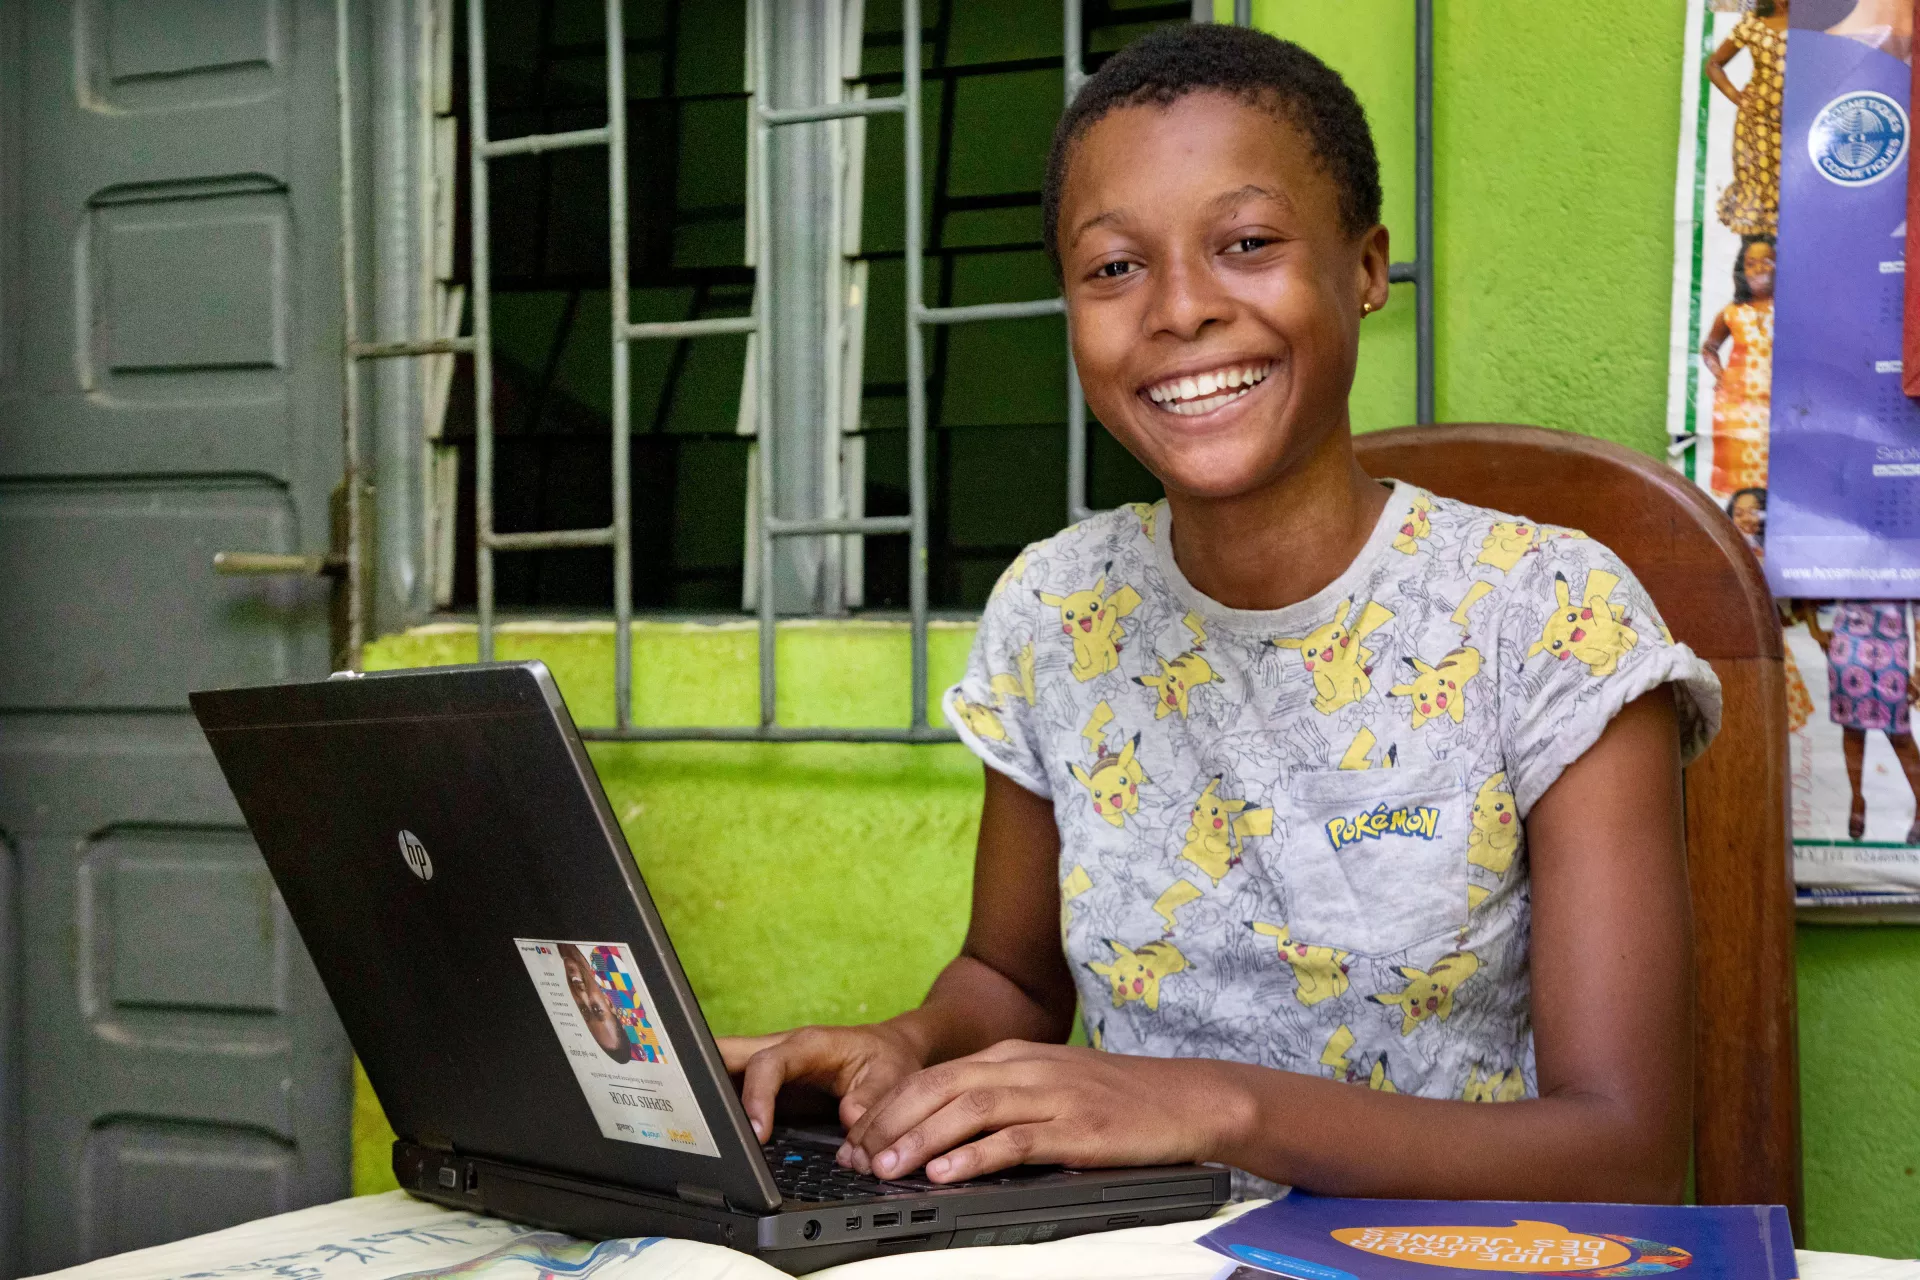 Tchétché Murielle Aholi, 16, follows the training given by Séphis on women's leadership, from her home in Yopougon, a suburban of Abidjan, a city in the south of Côte d'Ivoire.